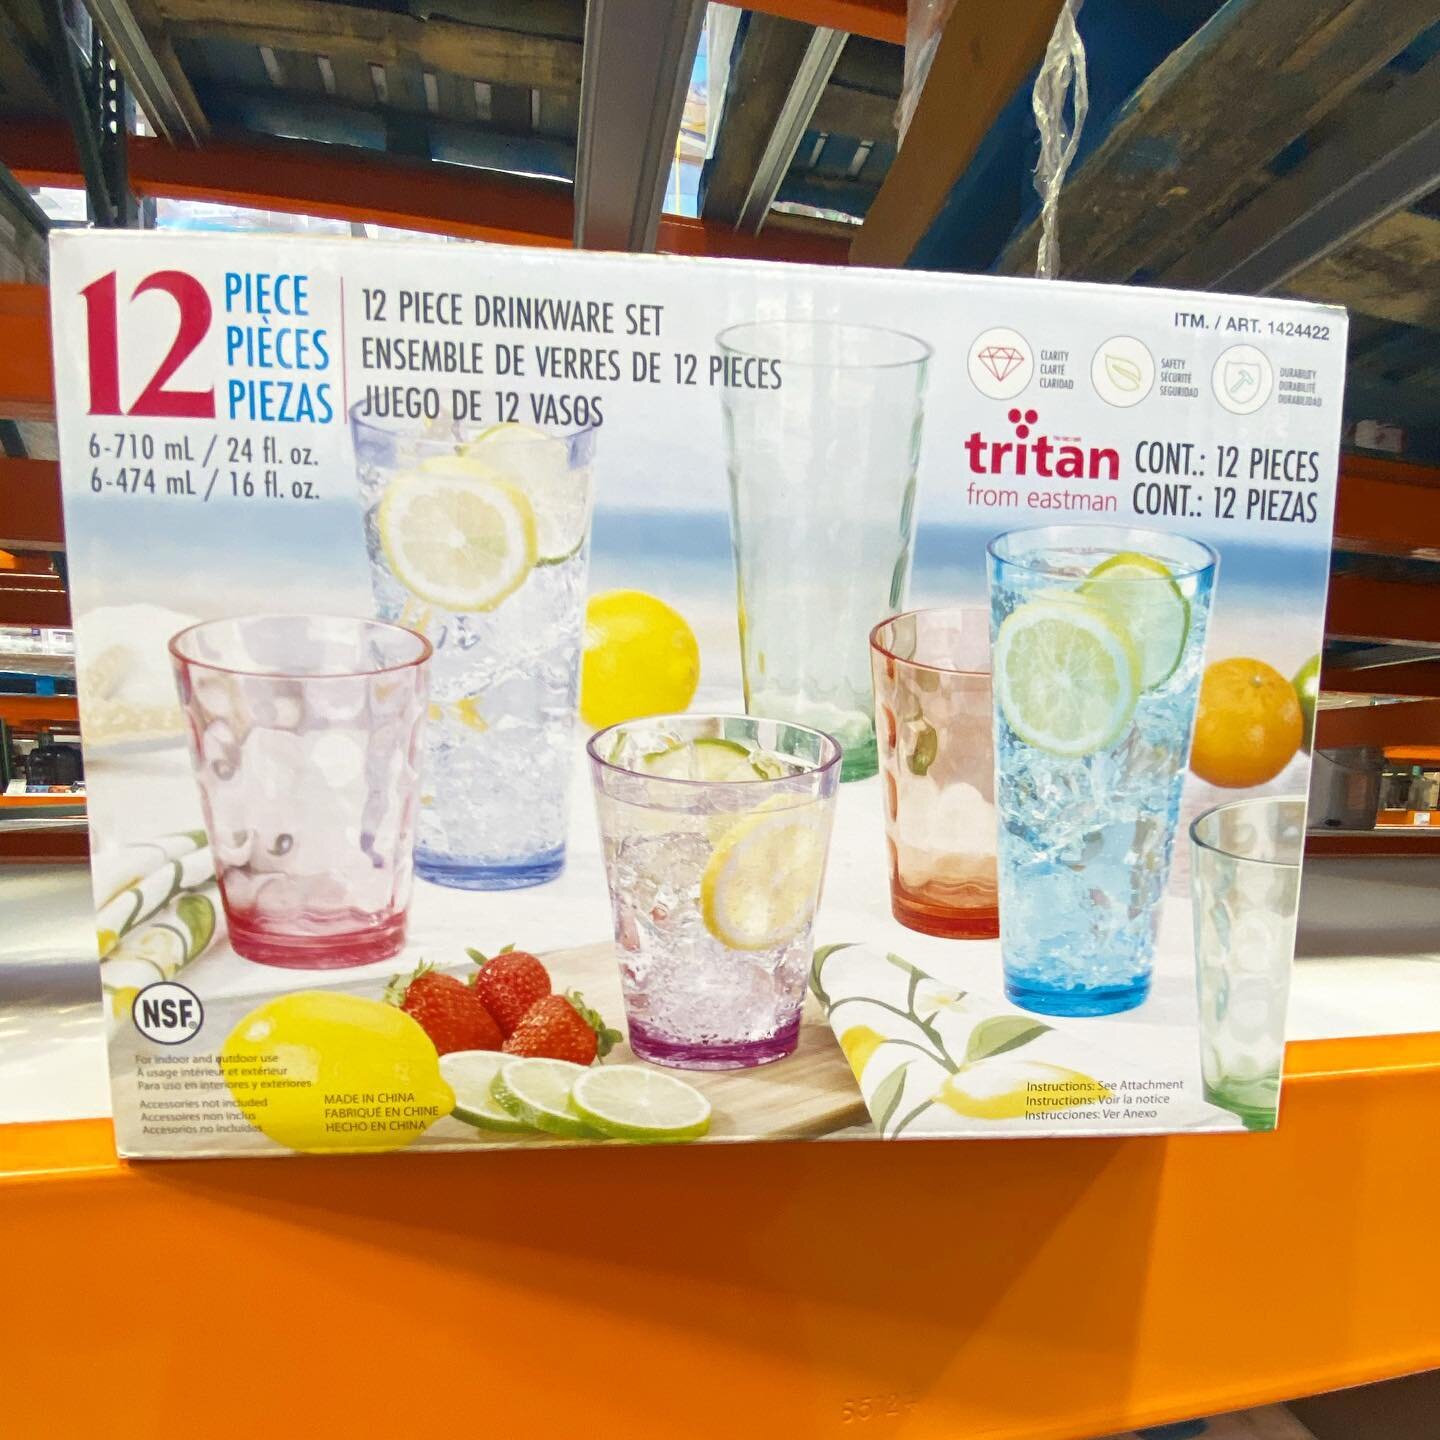 12 Piece Drinkware Set - this 12 piece plastic set of cups comes with 6x 710ml/ 24fl.oz sizes and 6x 474ml/16fl.oz. They are durable, dishwasher safe, temperature safe, and bpa free. Price $23.99 📍Newmarket 
#costco #costcofindscanada #costcofinds #